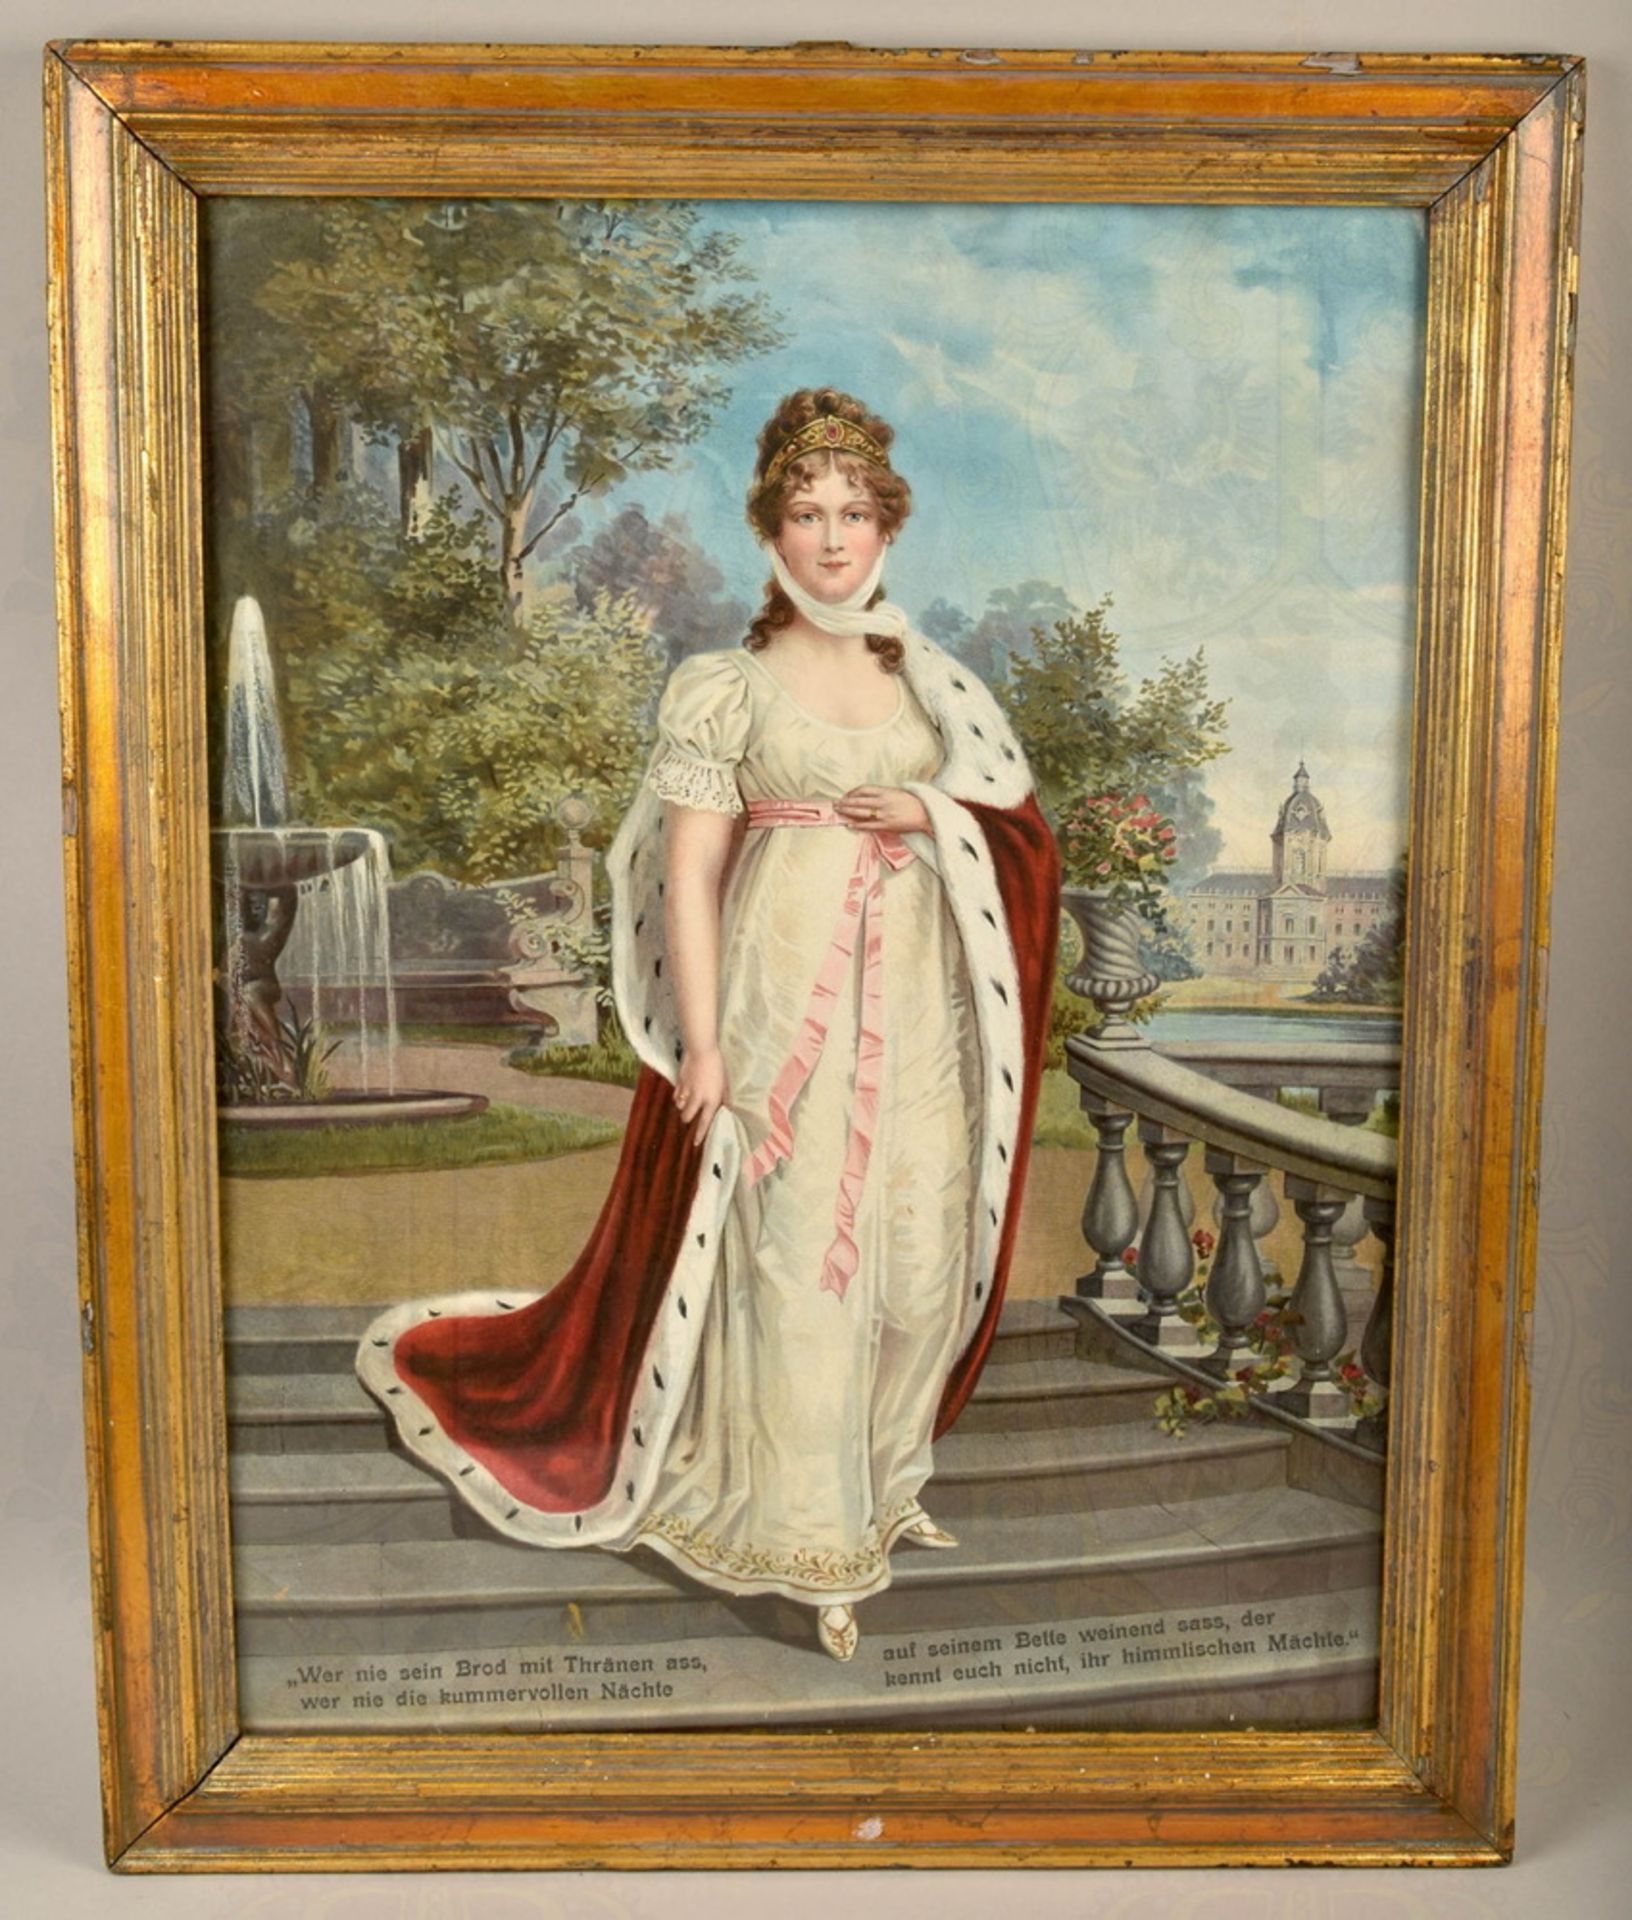 Portrait of Prussian Queen Luise about 1913